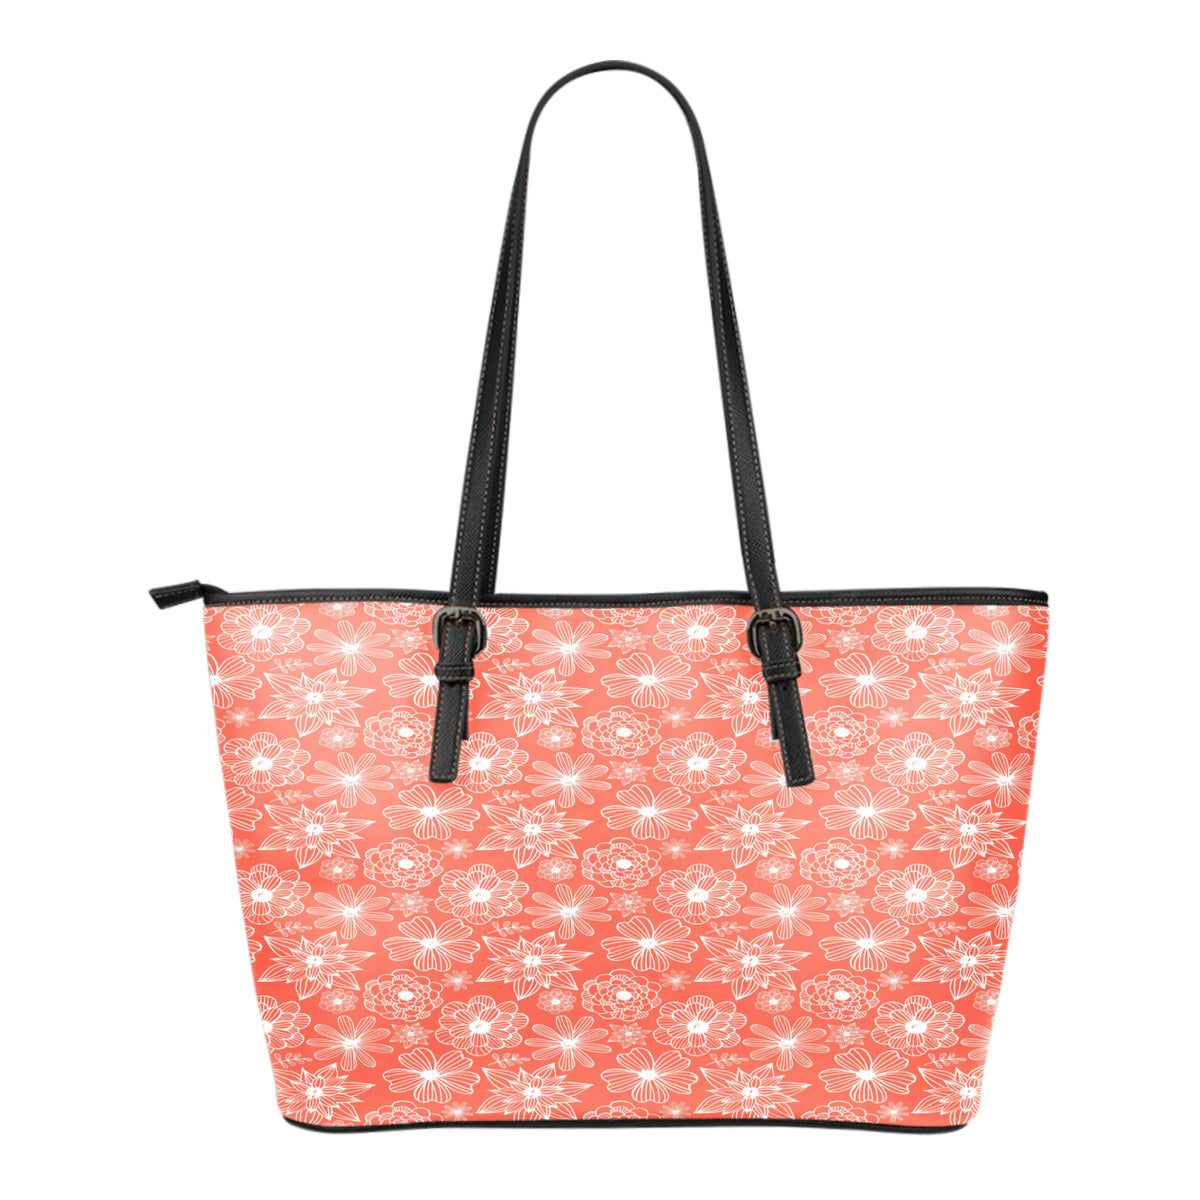 Floral Springs Themed Design C4 Women Large Leather Tote Bag